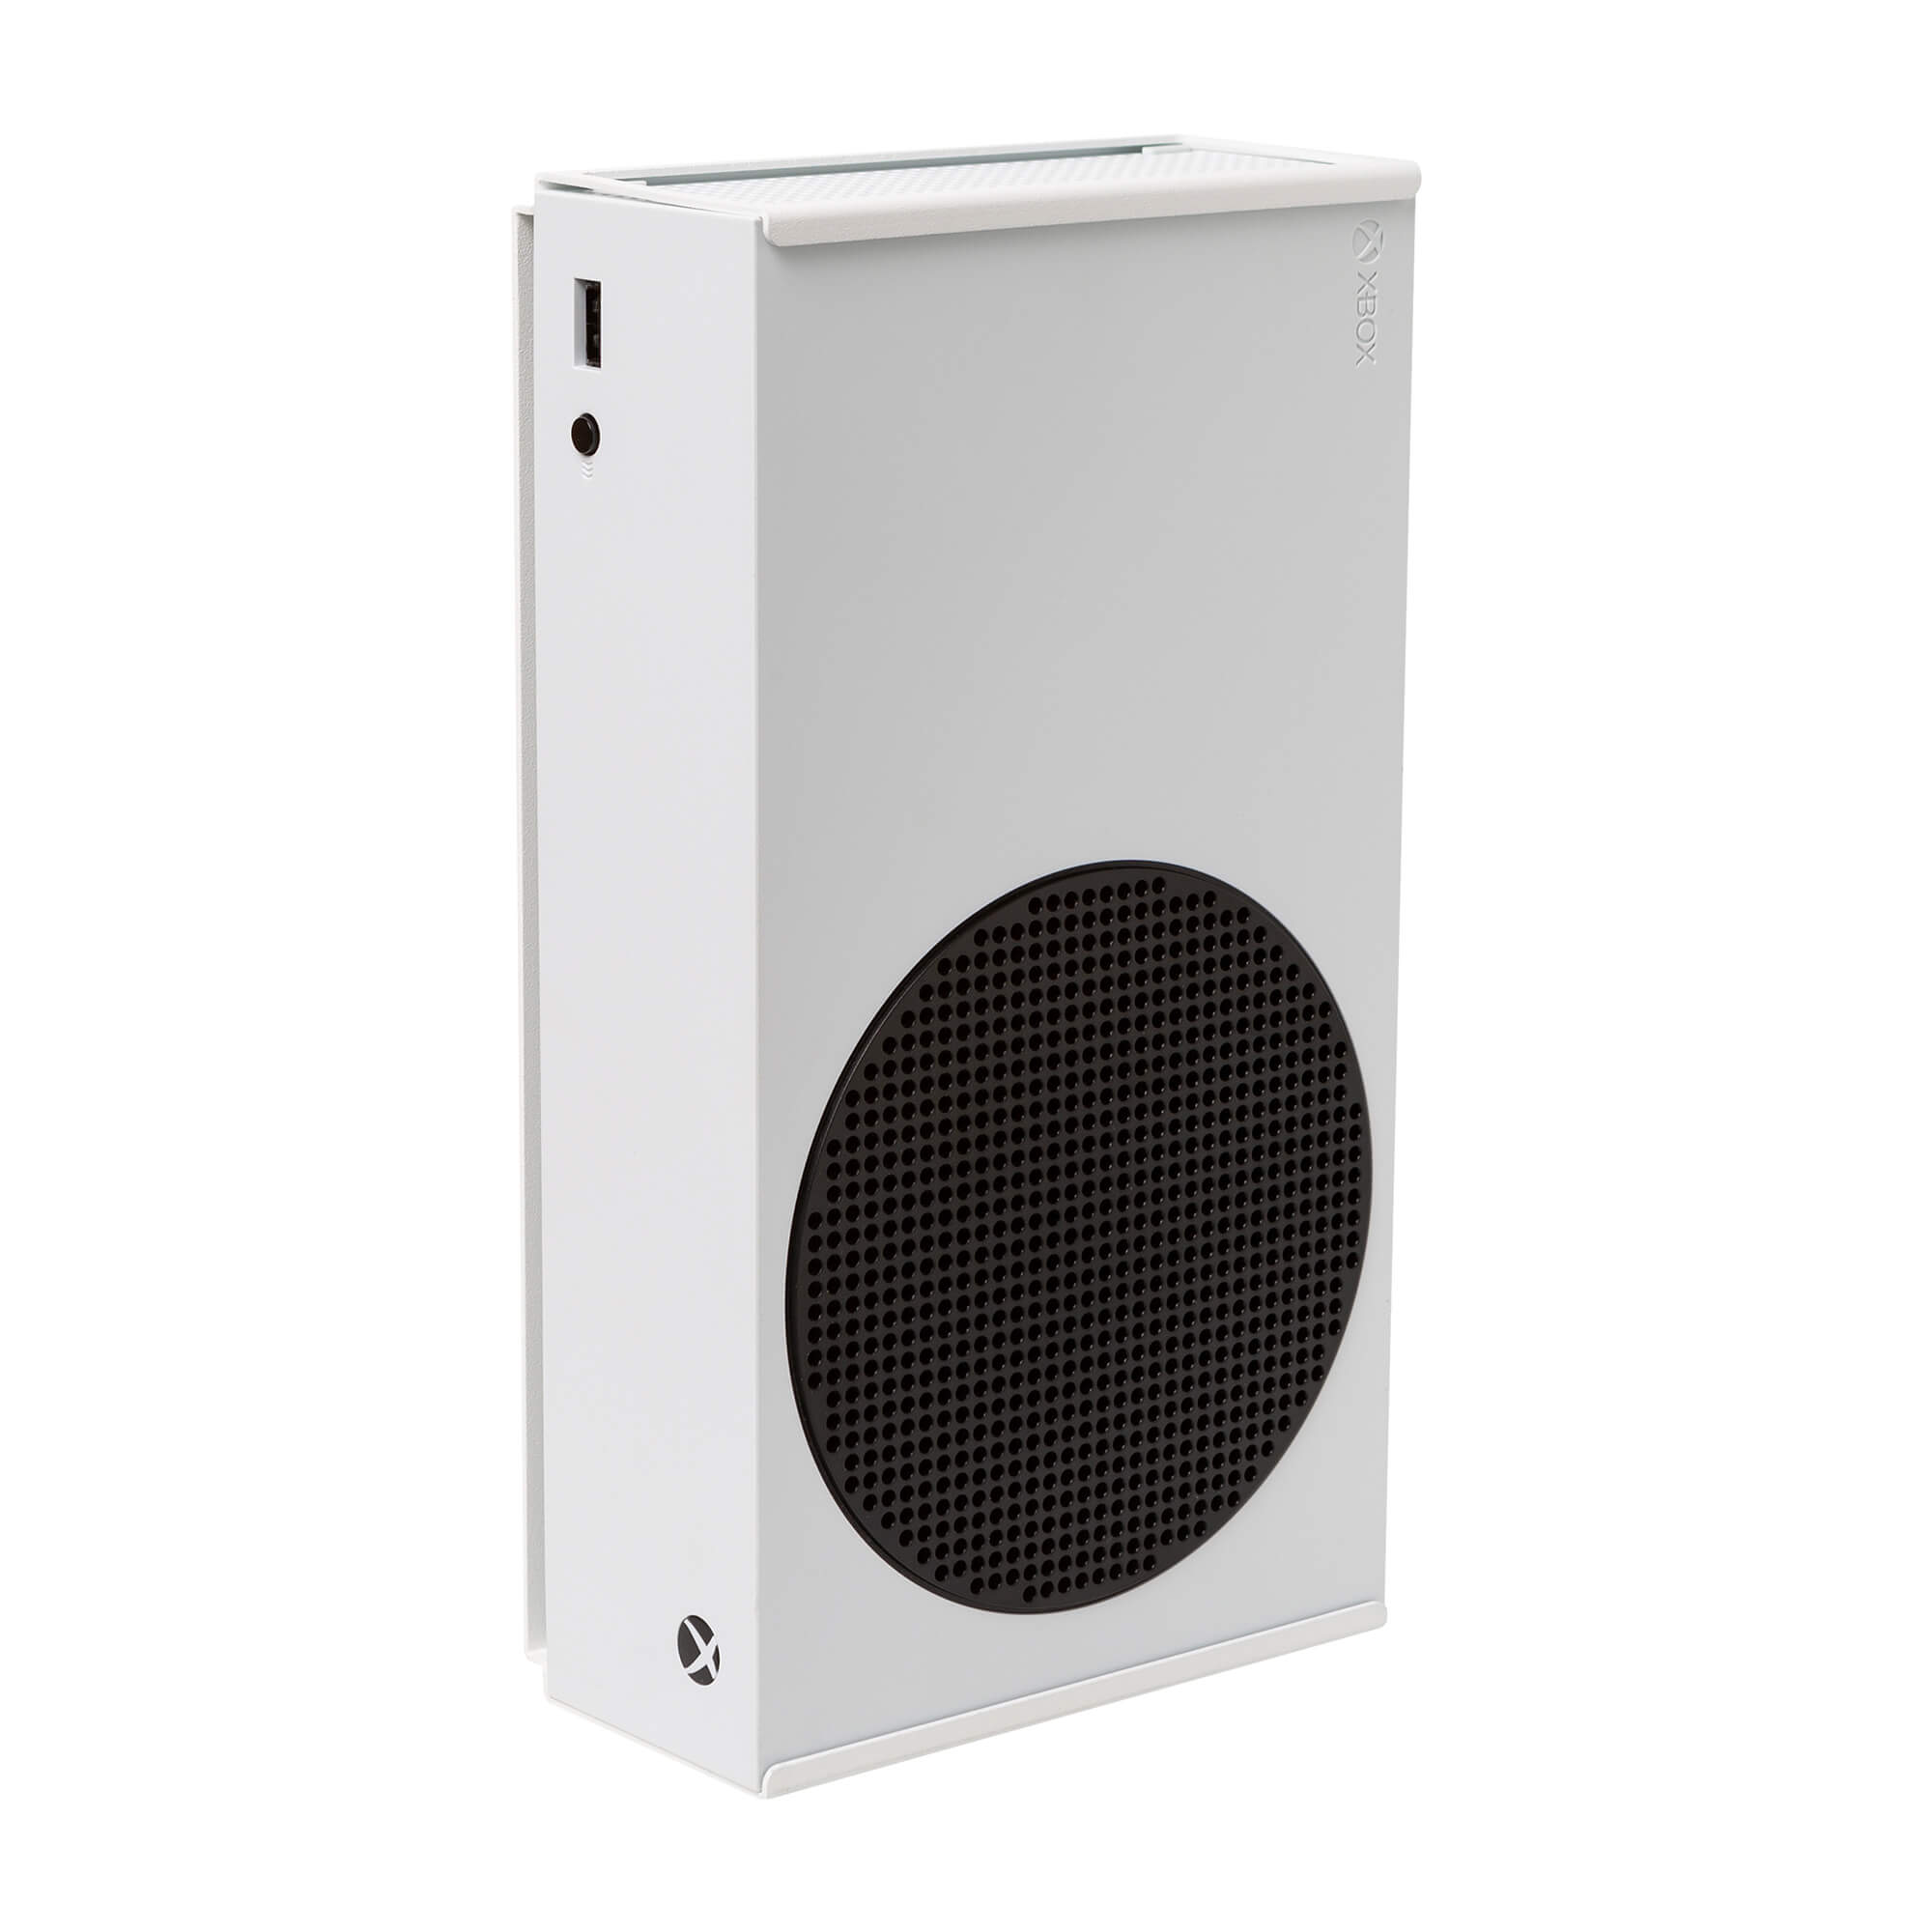 Microsoft Xbox Series S securely held in the HIDEit Xbox Series S Mount in white.